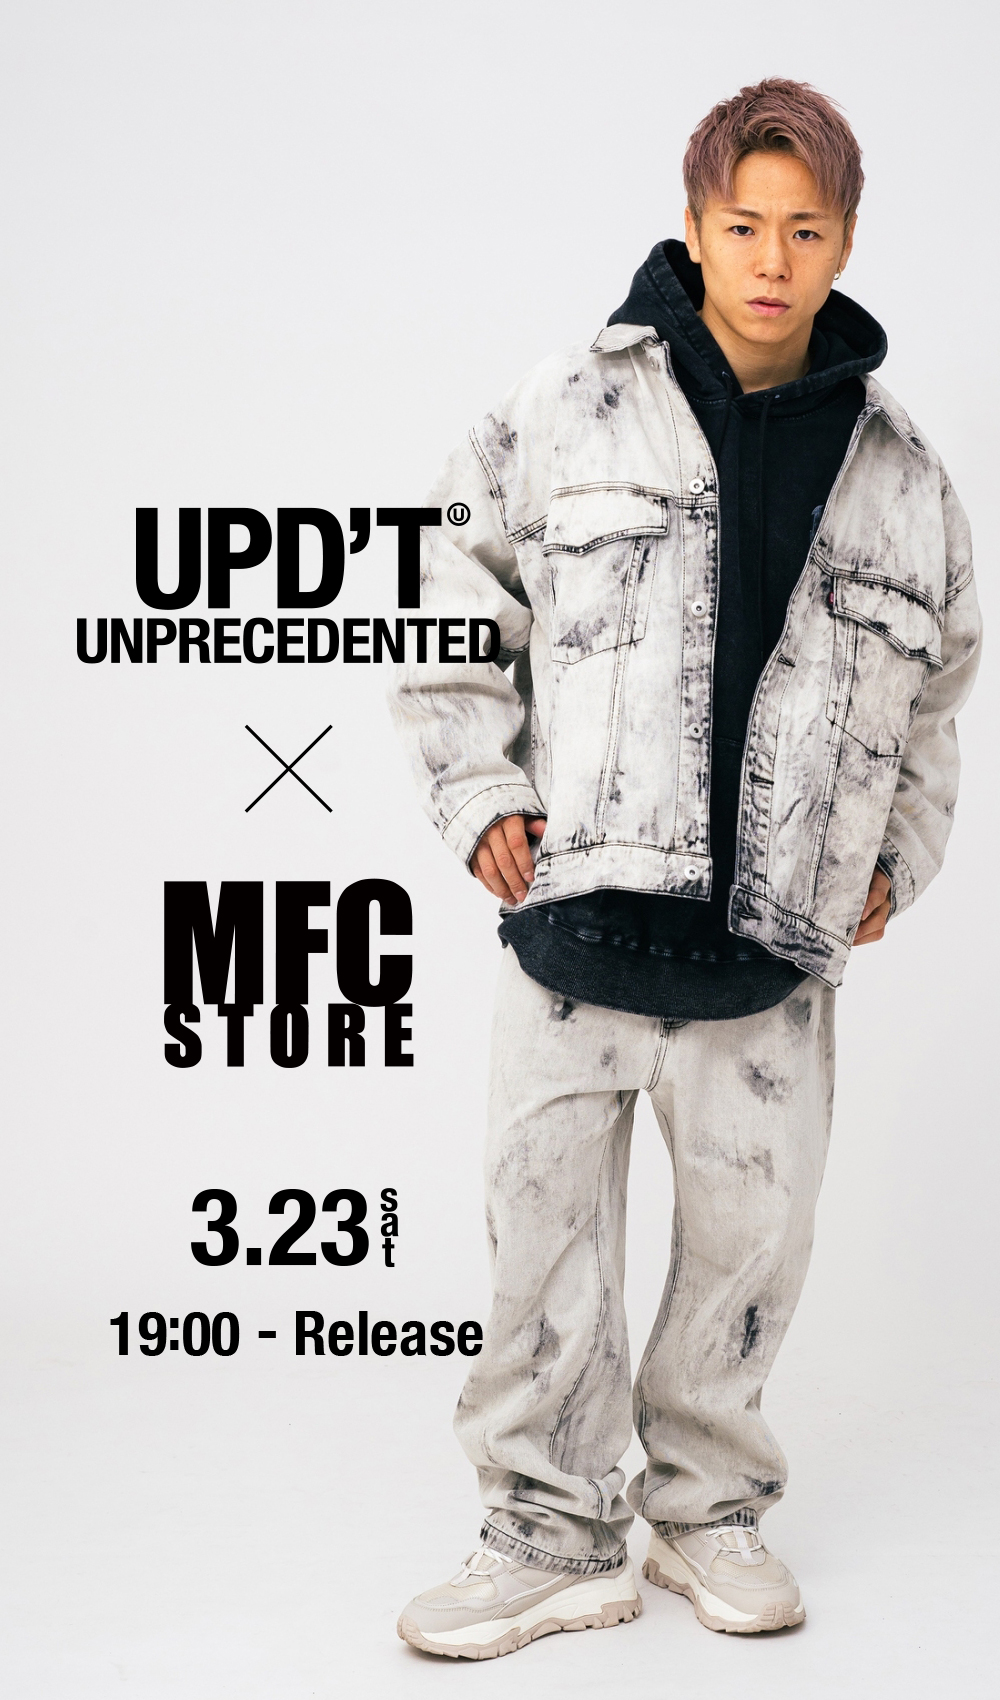 UPD'T x MFC STORE